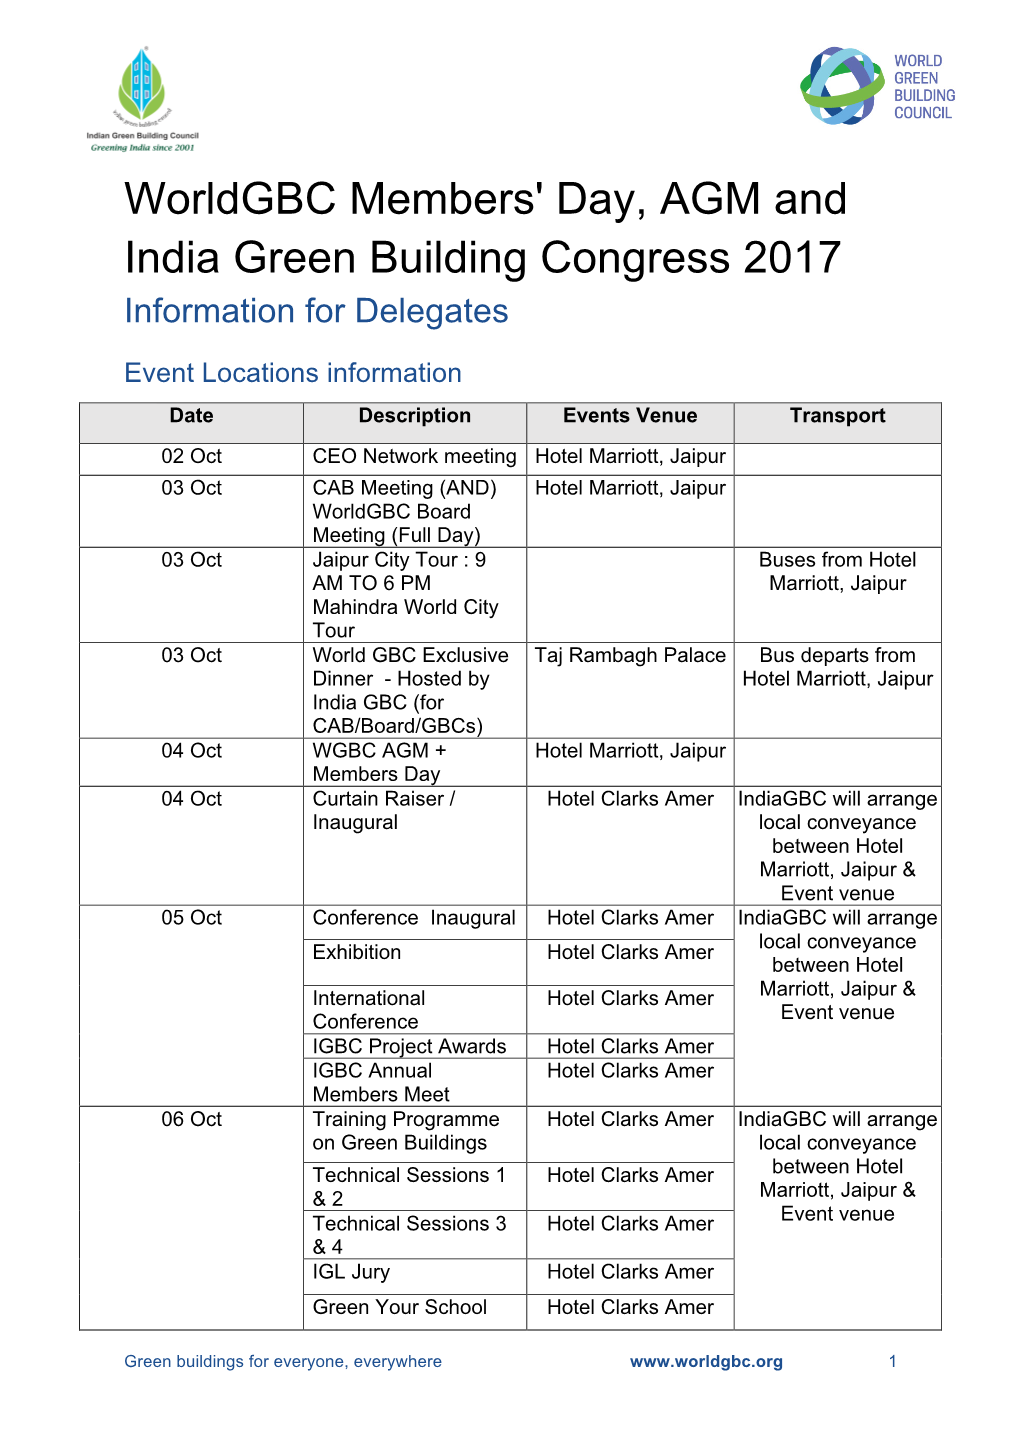 Worldgbc Members' Day, AGM and India Green Building Congress 2017 Information for Delegates